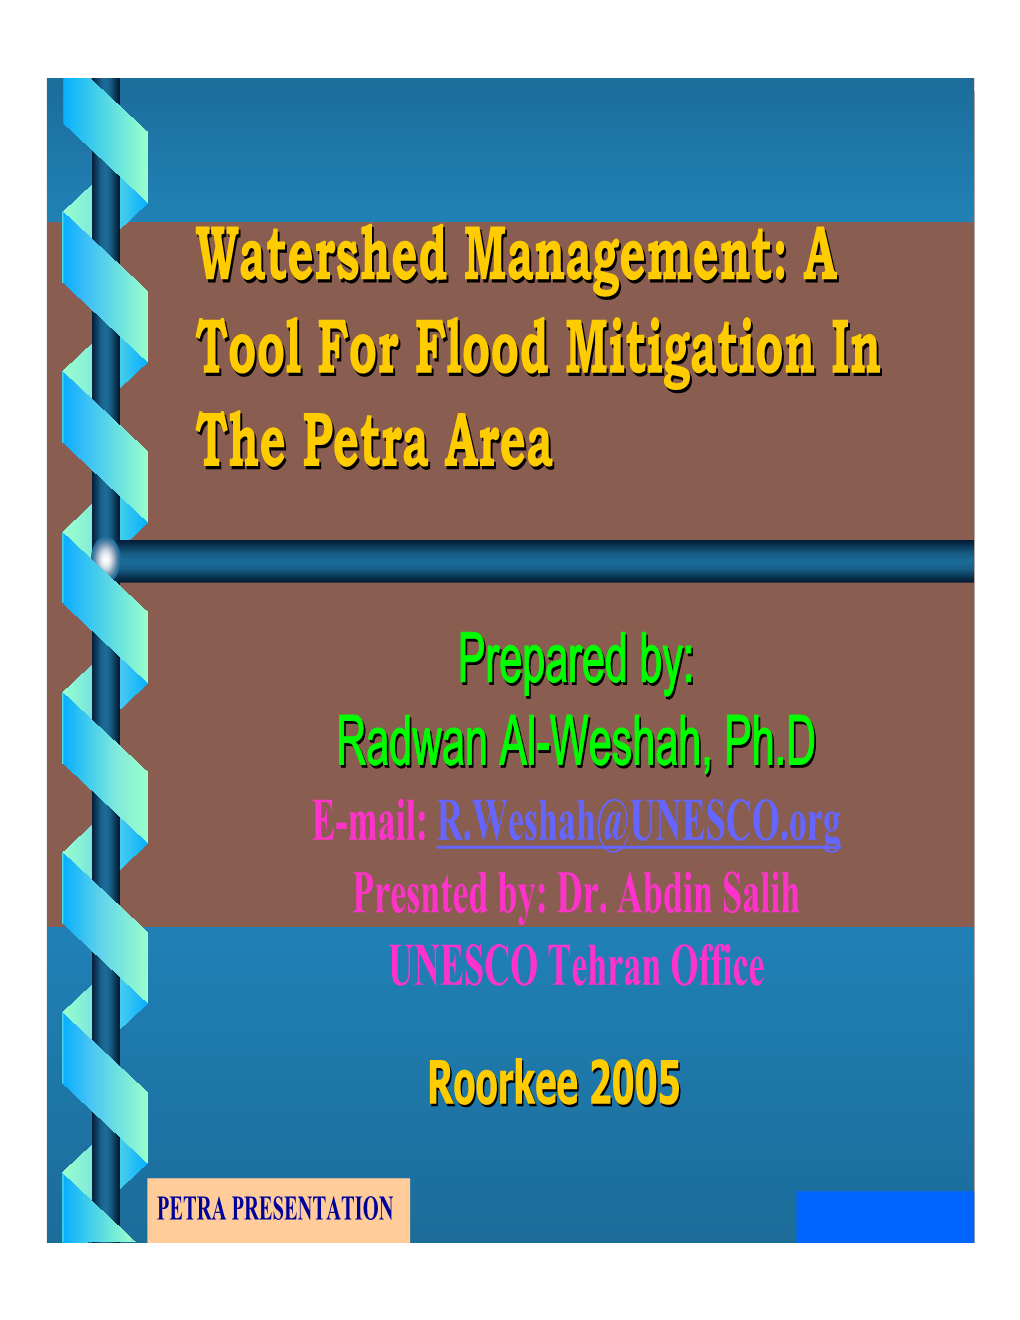 Watershed Management: a Tool for Flood Mitigation in the Petra Area